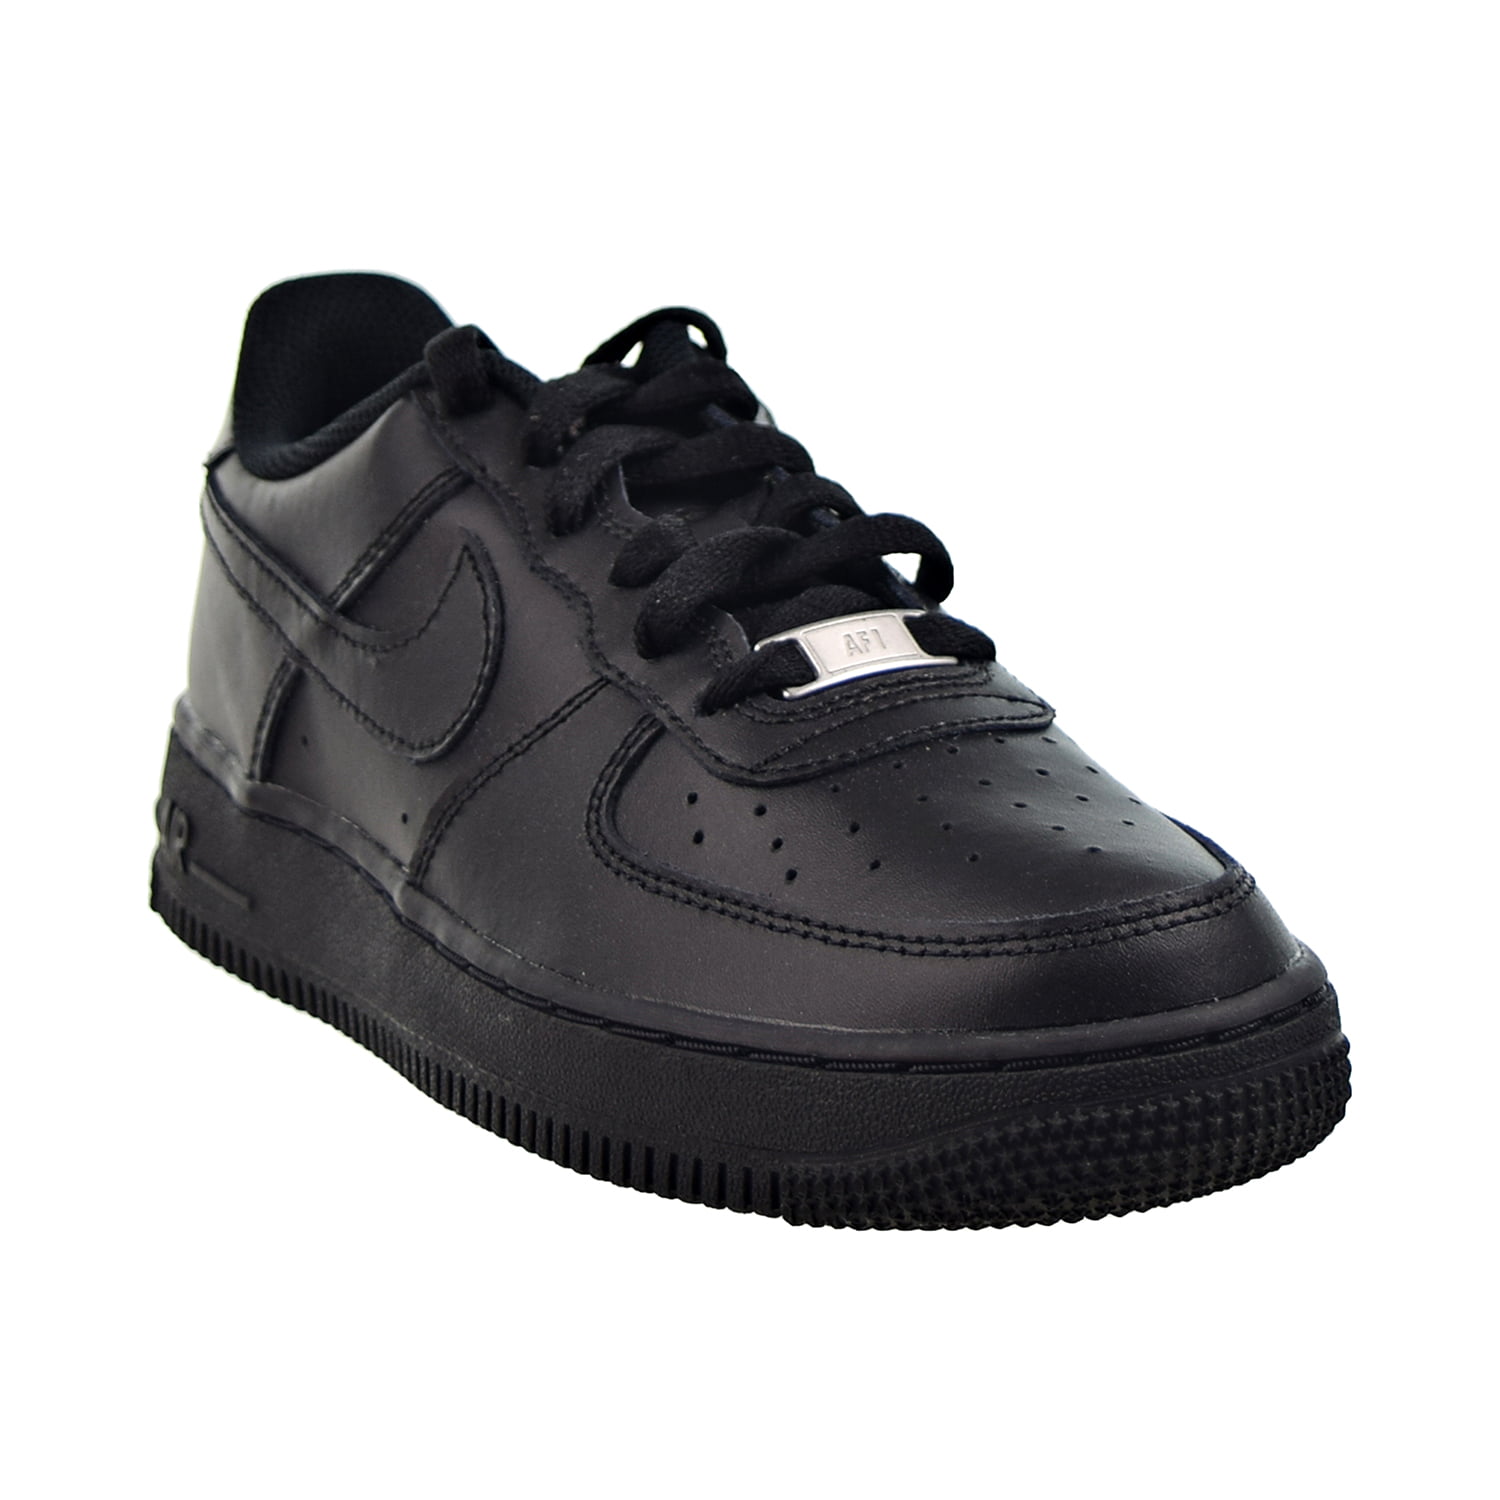 Nike Youth Kids Air Force 1 Sneakers Shoes Triple Black DH2925-001 Size 12C  12